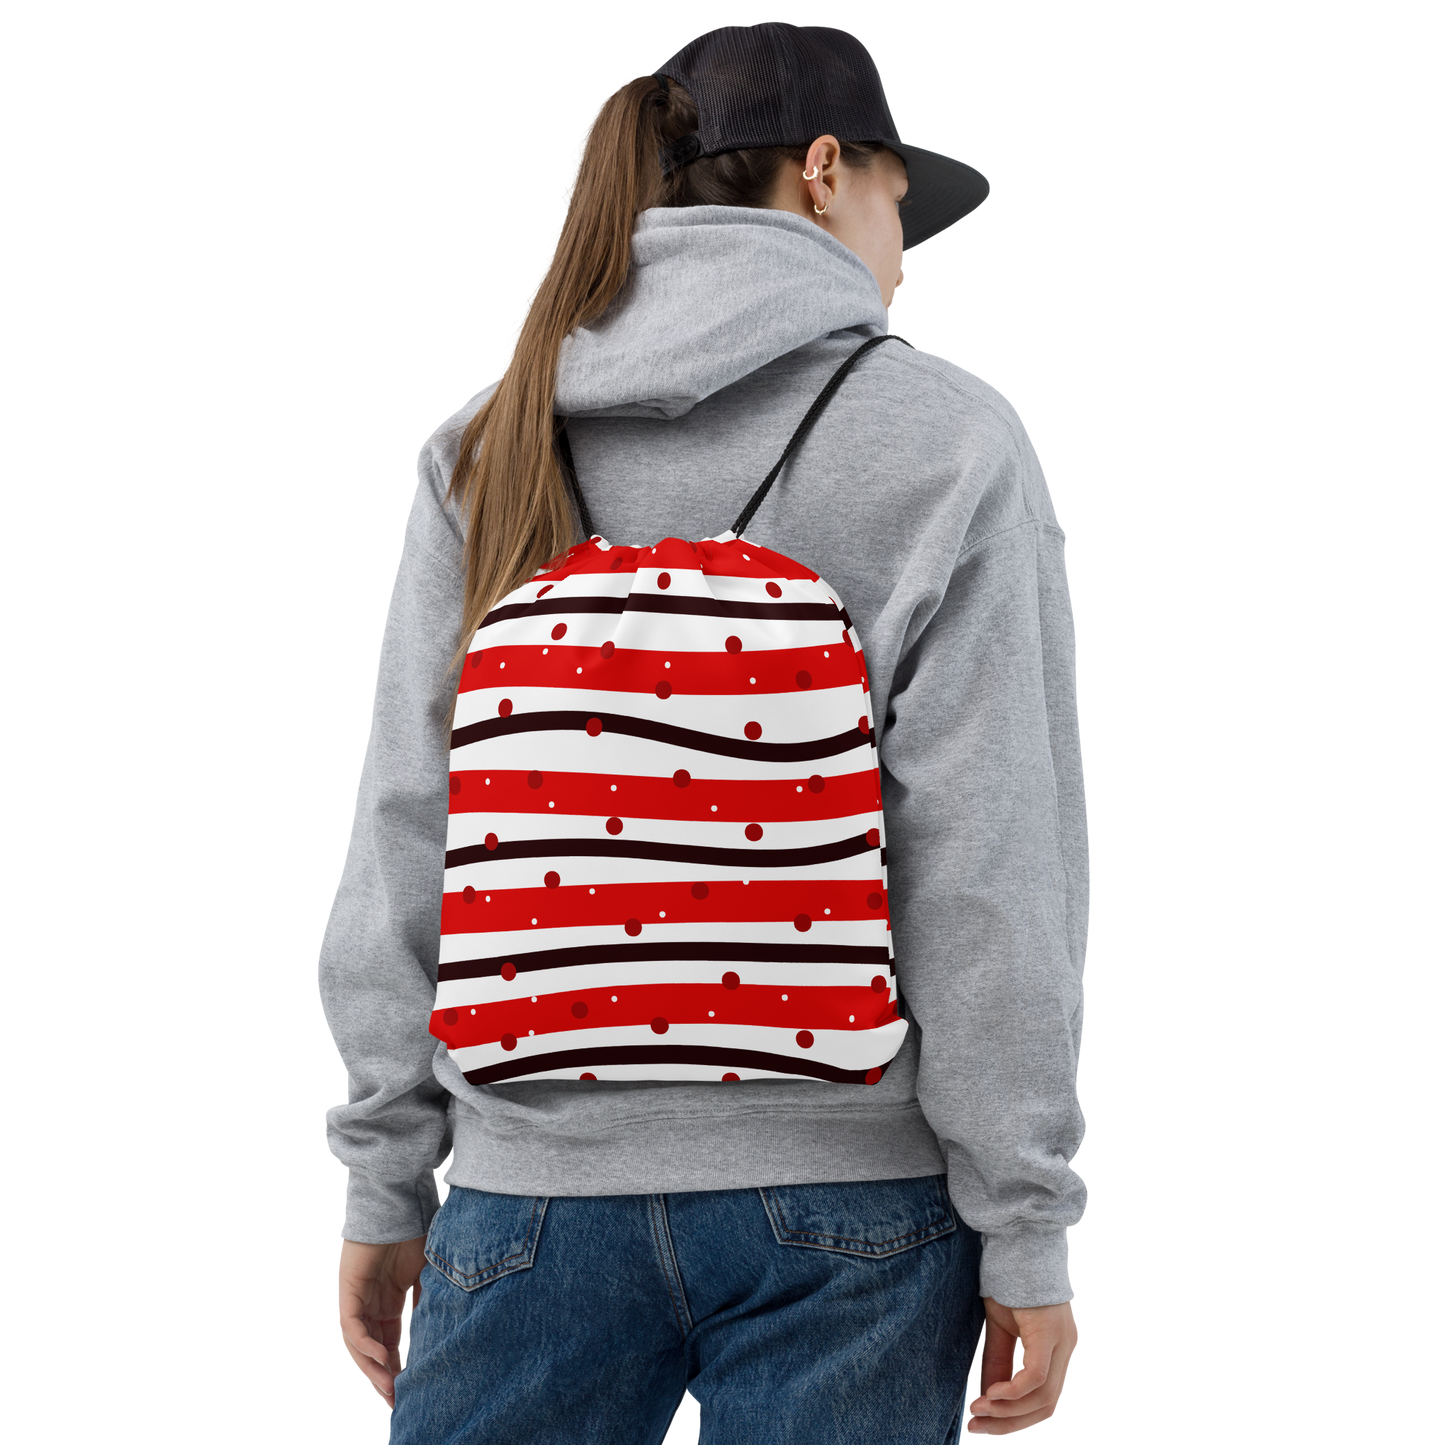 Black & Red | Colorful Patterns | All-Over Print Drawstring Bag - #11